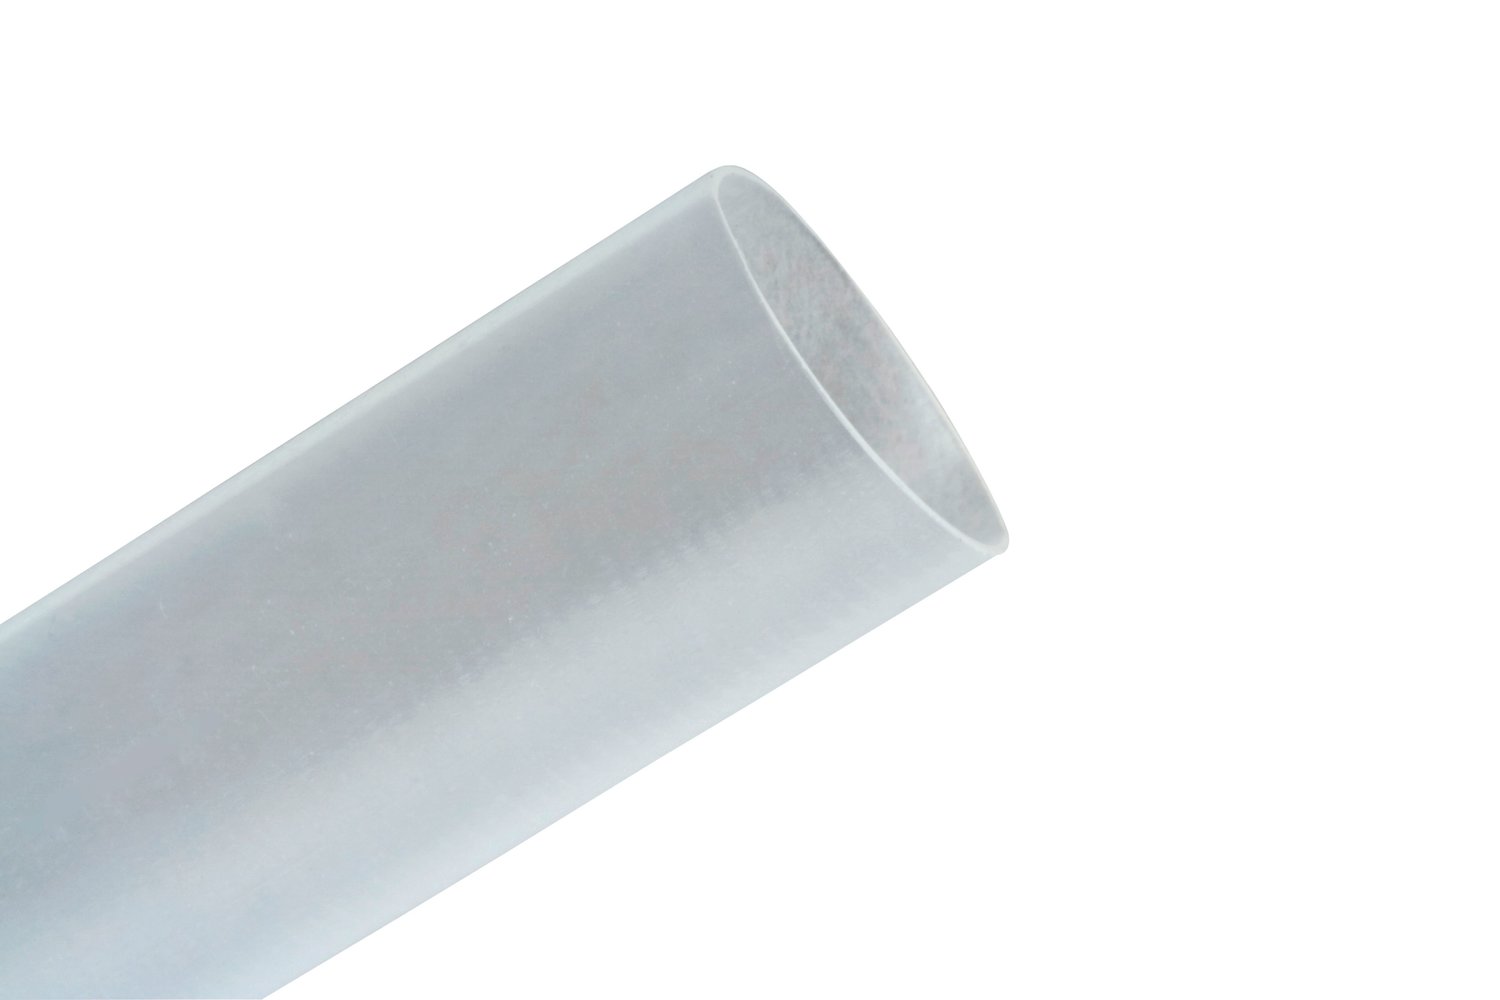 7100083169 - 3M Heat Shrink Thin-Wall Tubing FP-301-4-Clear-50`: 50 ft spool length,
50 linear ft/box, 1 Roll/Case